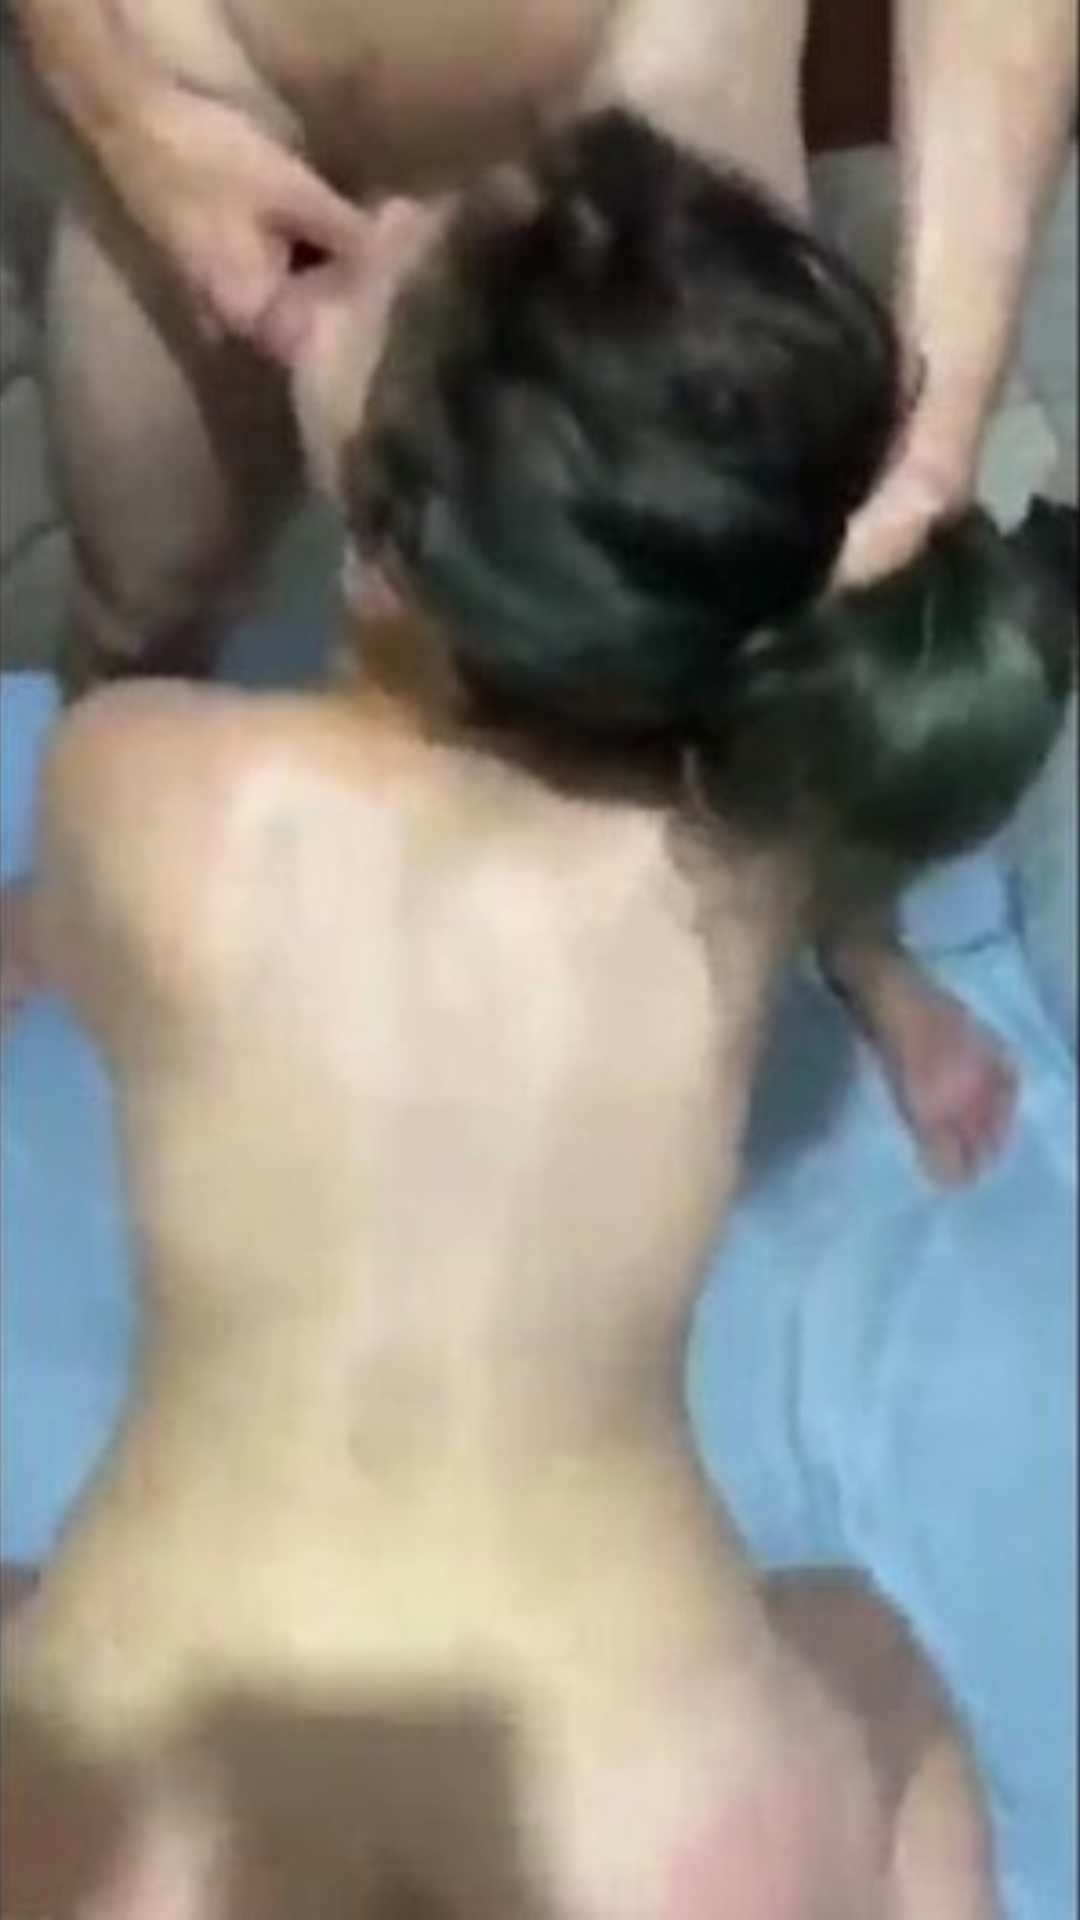 Bitch Sucking Her Husband While Single Fucks Her Pussy